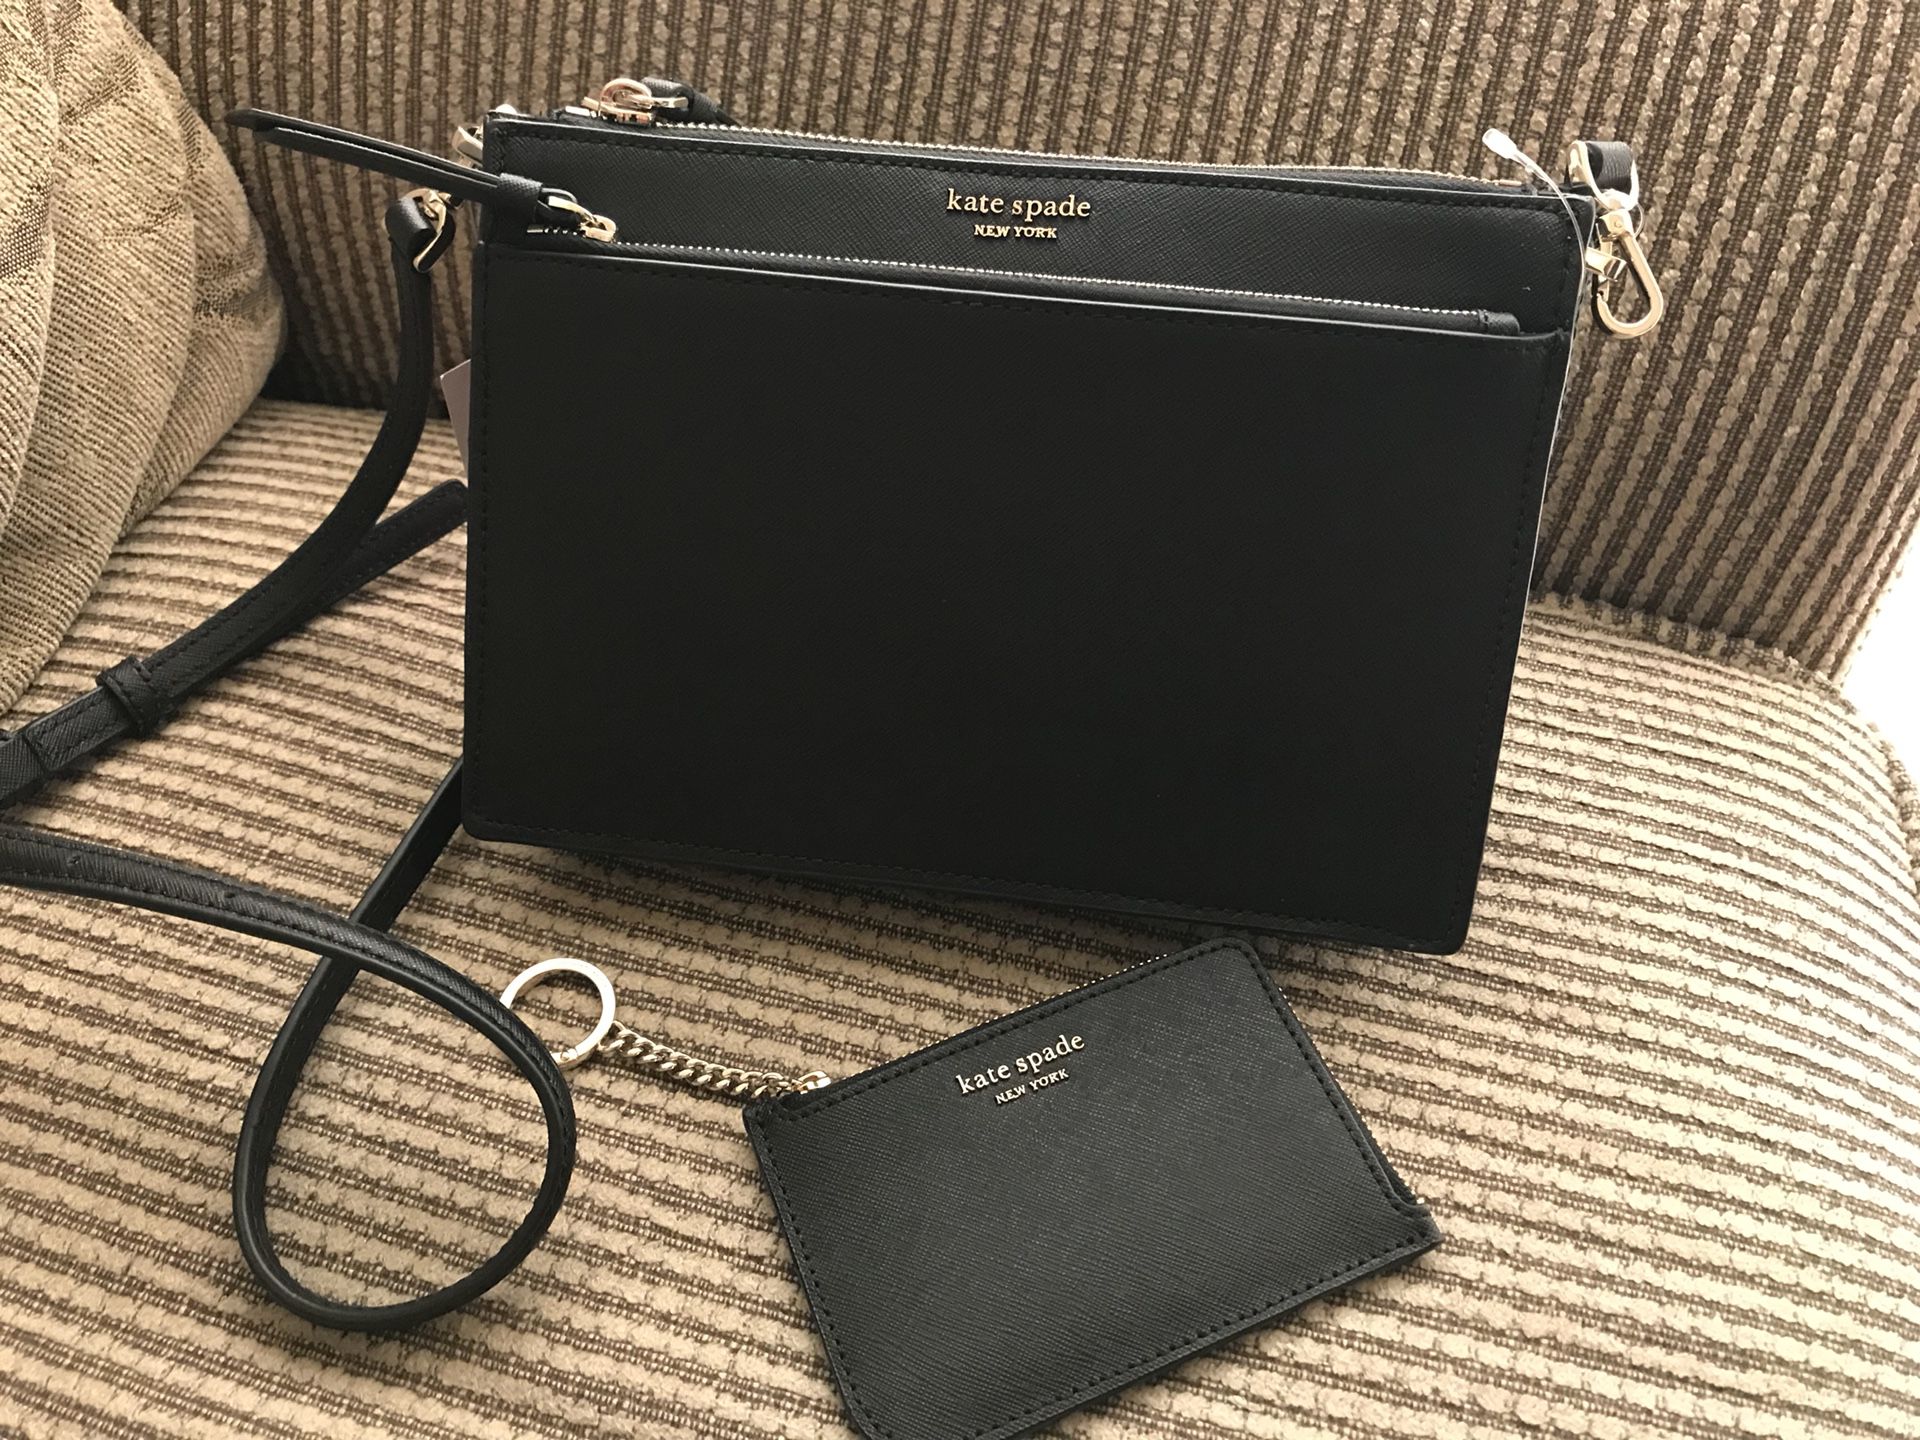 Kate spade crossbody with FREE WALLET